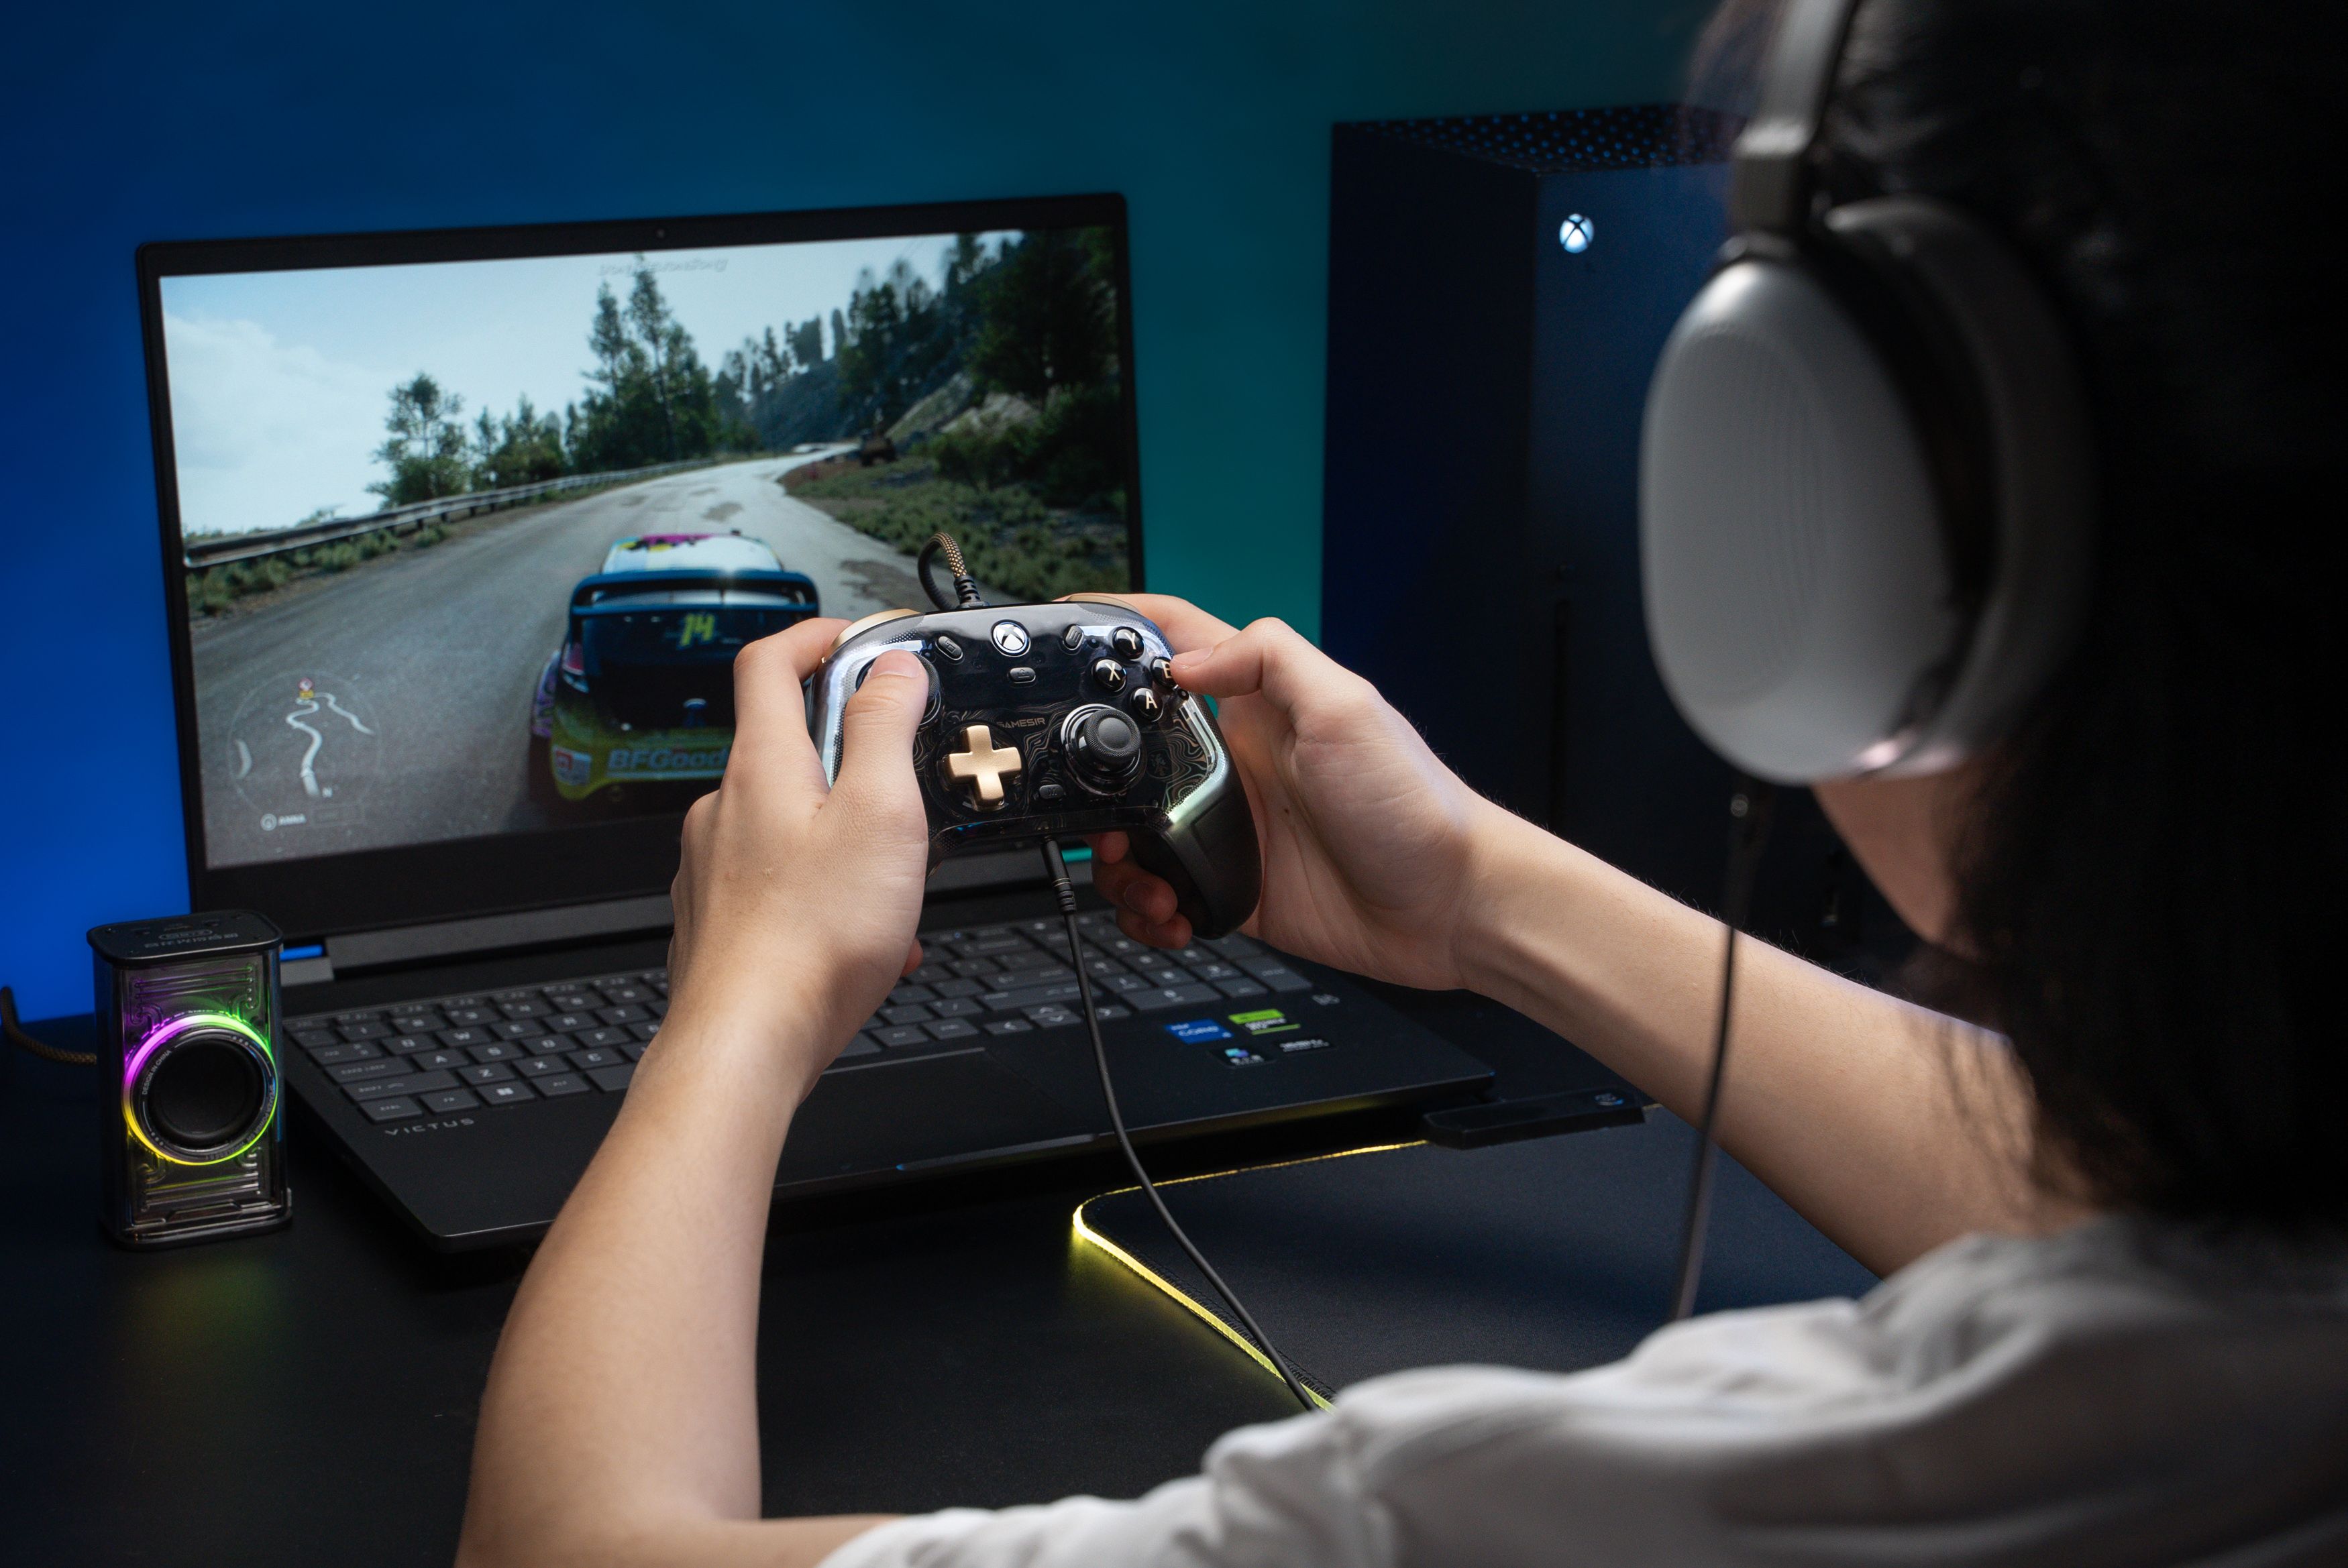 An image of the GameSir Kaleid Flex in a person's hand playing a racing video game.